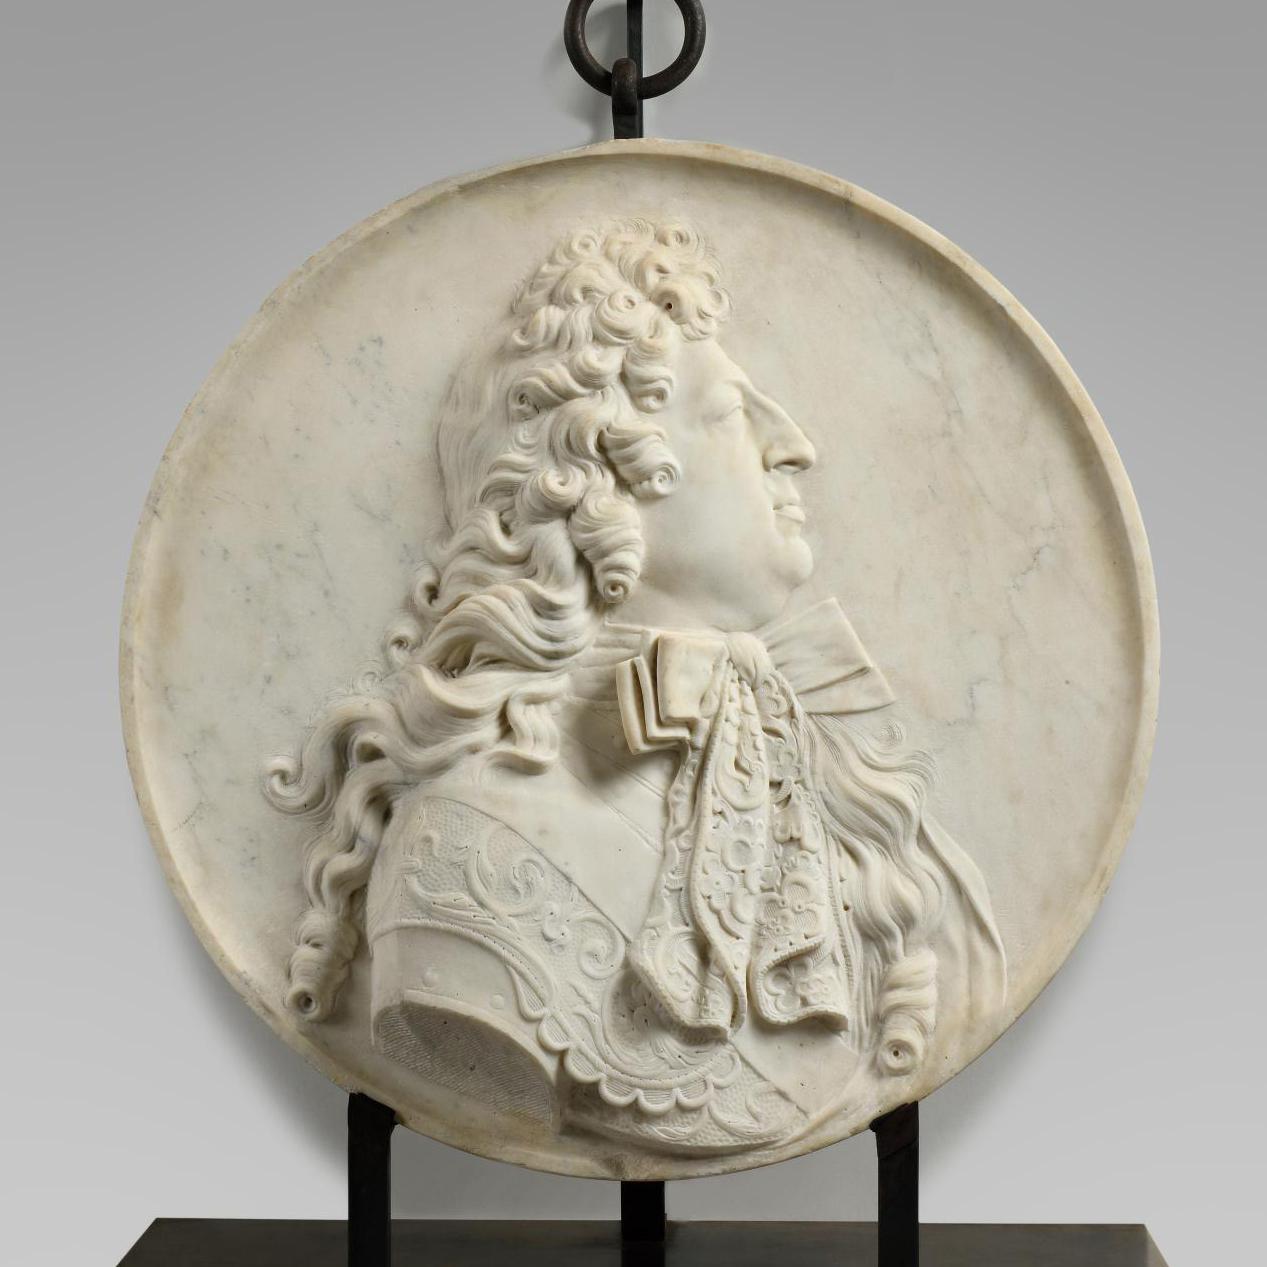 The Age of Louis XIV on Show at the Alexis Bordes Gallery in Paris - Exhibitions